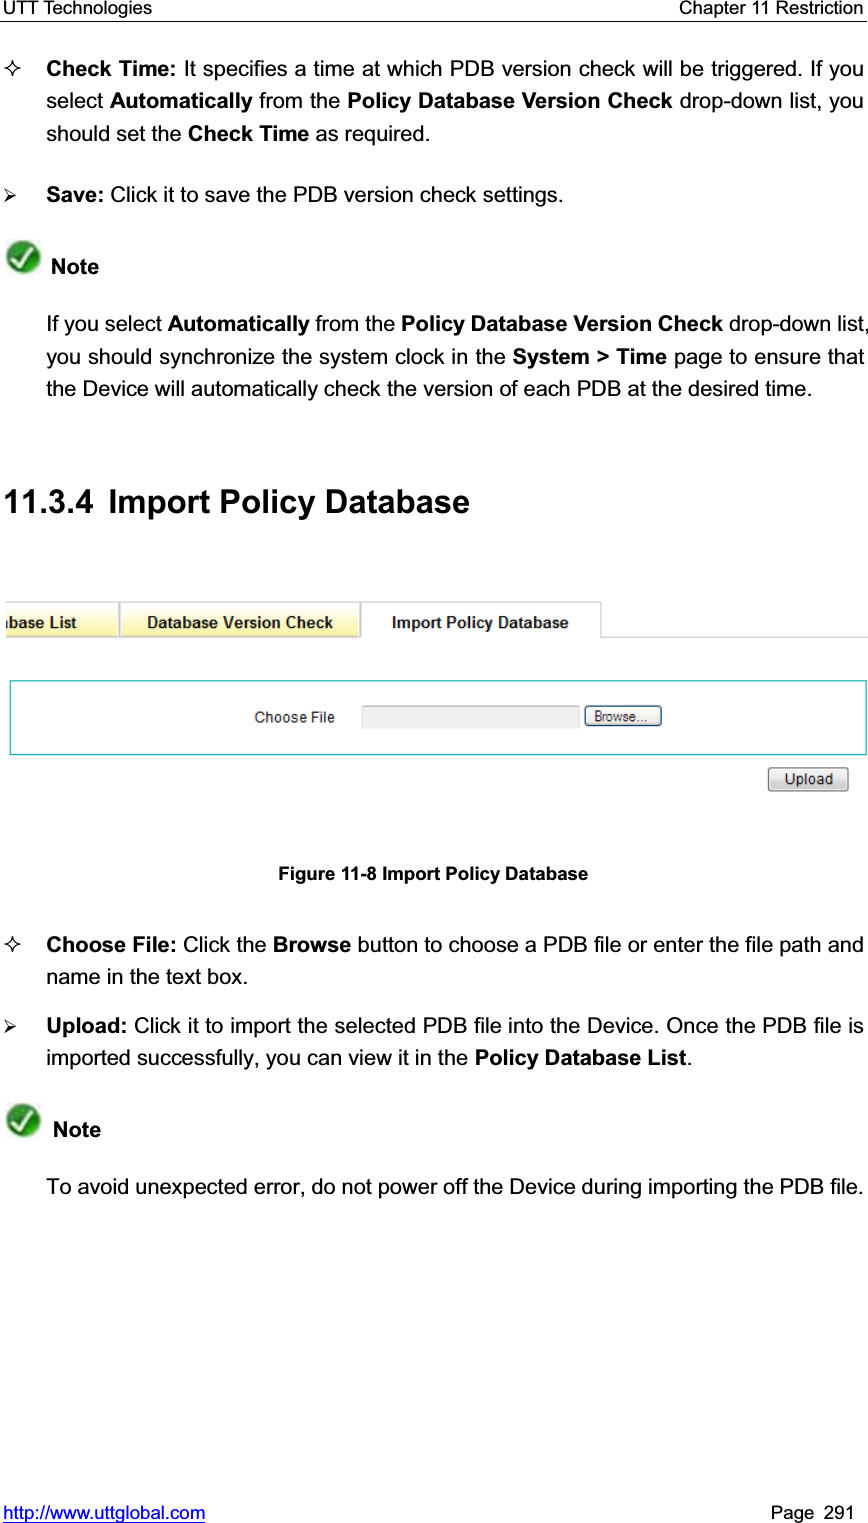 UTT Technologies    Chapter 11 Restriction   http://www.uttglobal.com Page 291 Check Time: It specifies a time at which PDB version check will be triggered. If you select Automatically from the Policy Database Version Check drop-down list, you should set the Check Time as required.   ¾Save: Click it to save the PDB version check settings.NoteIf you select Automatically from the Policy Database Version Check drop-down list, you should synchronize the system clock in the System &gt; Time page to ensure that the Device will automatically check the version of each PDB at the desired time.   11.3.4 Import Policy Database Figure 11-8 Import Policy Database Choose File: Click the Browse button to choose a PDB file or enter the file path and name in the text box. ¾Upload: Click it to import the selected PDB file into the Device. Once the PDB file is imported successfully, you can view it in the Policy Database List.NoteTo avoid unexpected error, do not power off the Device during importing the PDB file.   